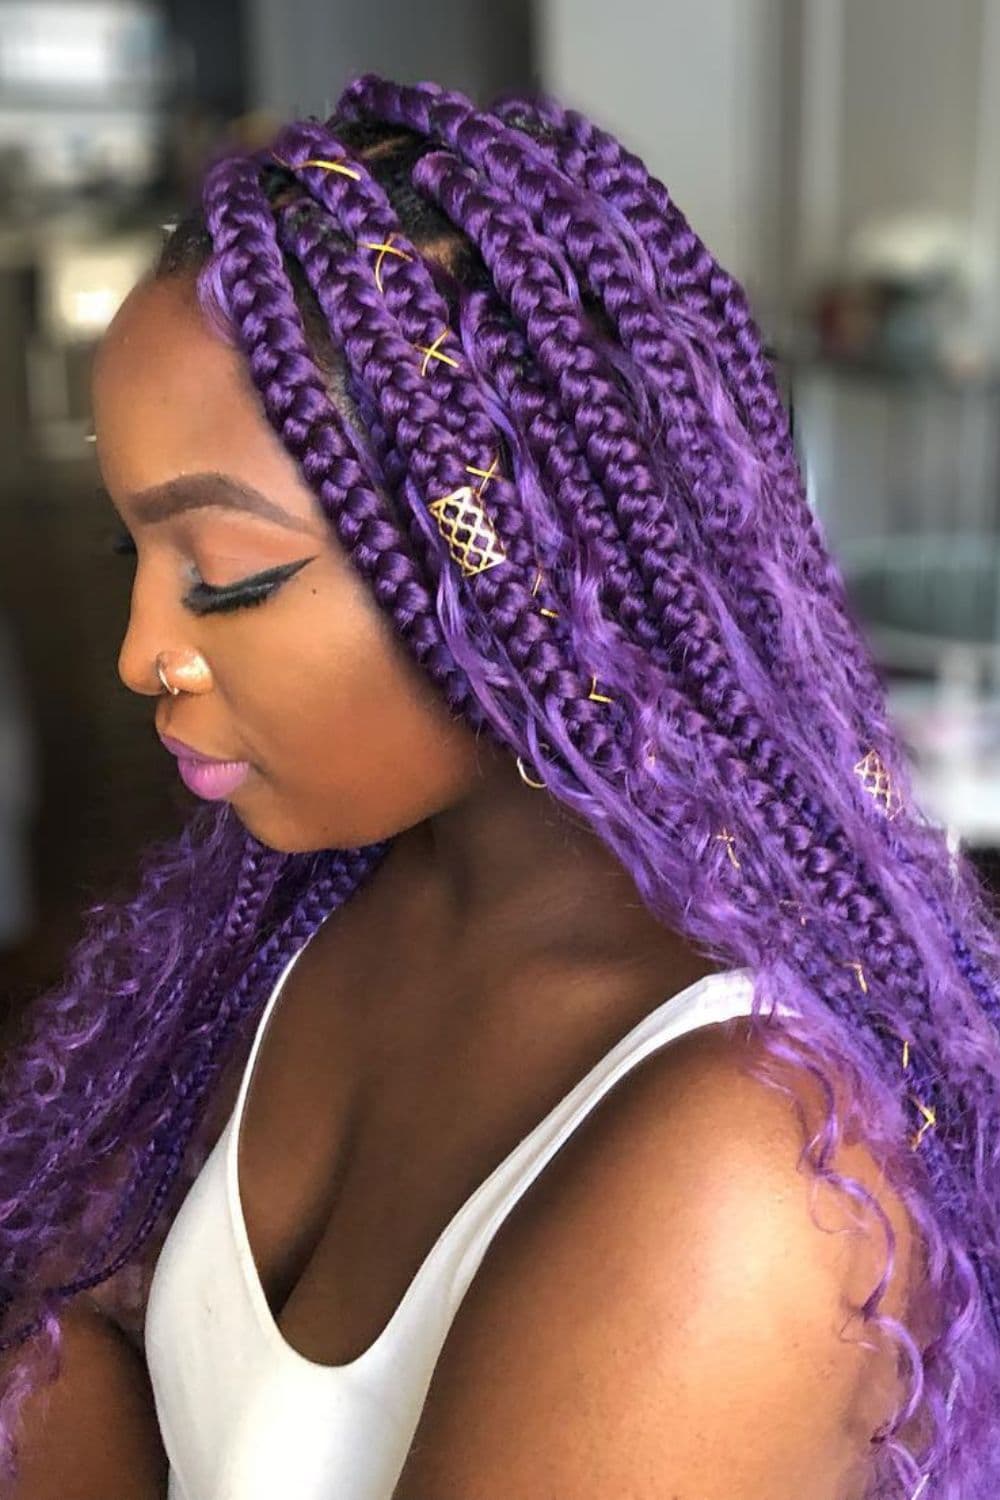 Side view of a woman with purple goddess braids with cuffs and thread.